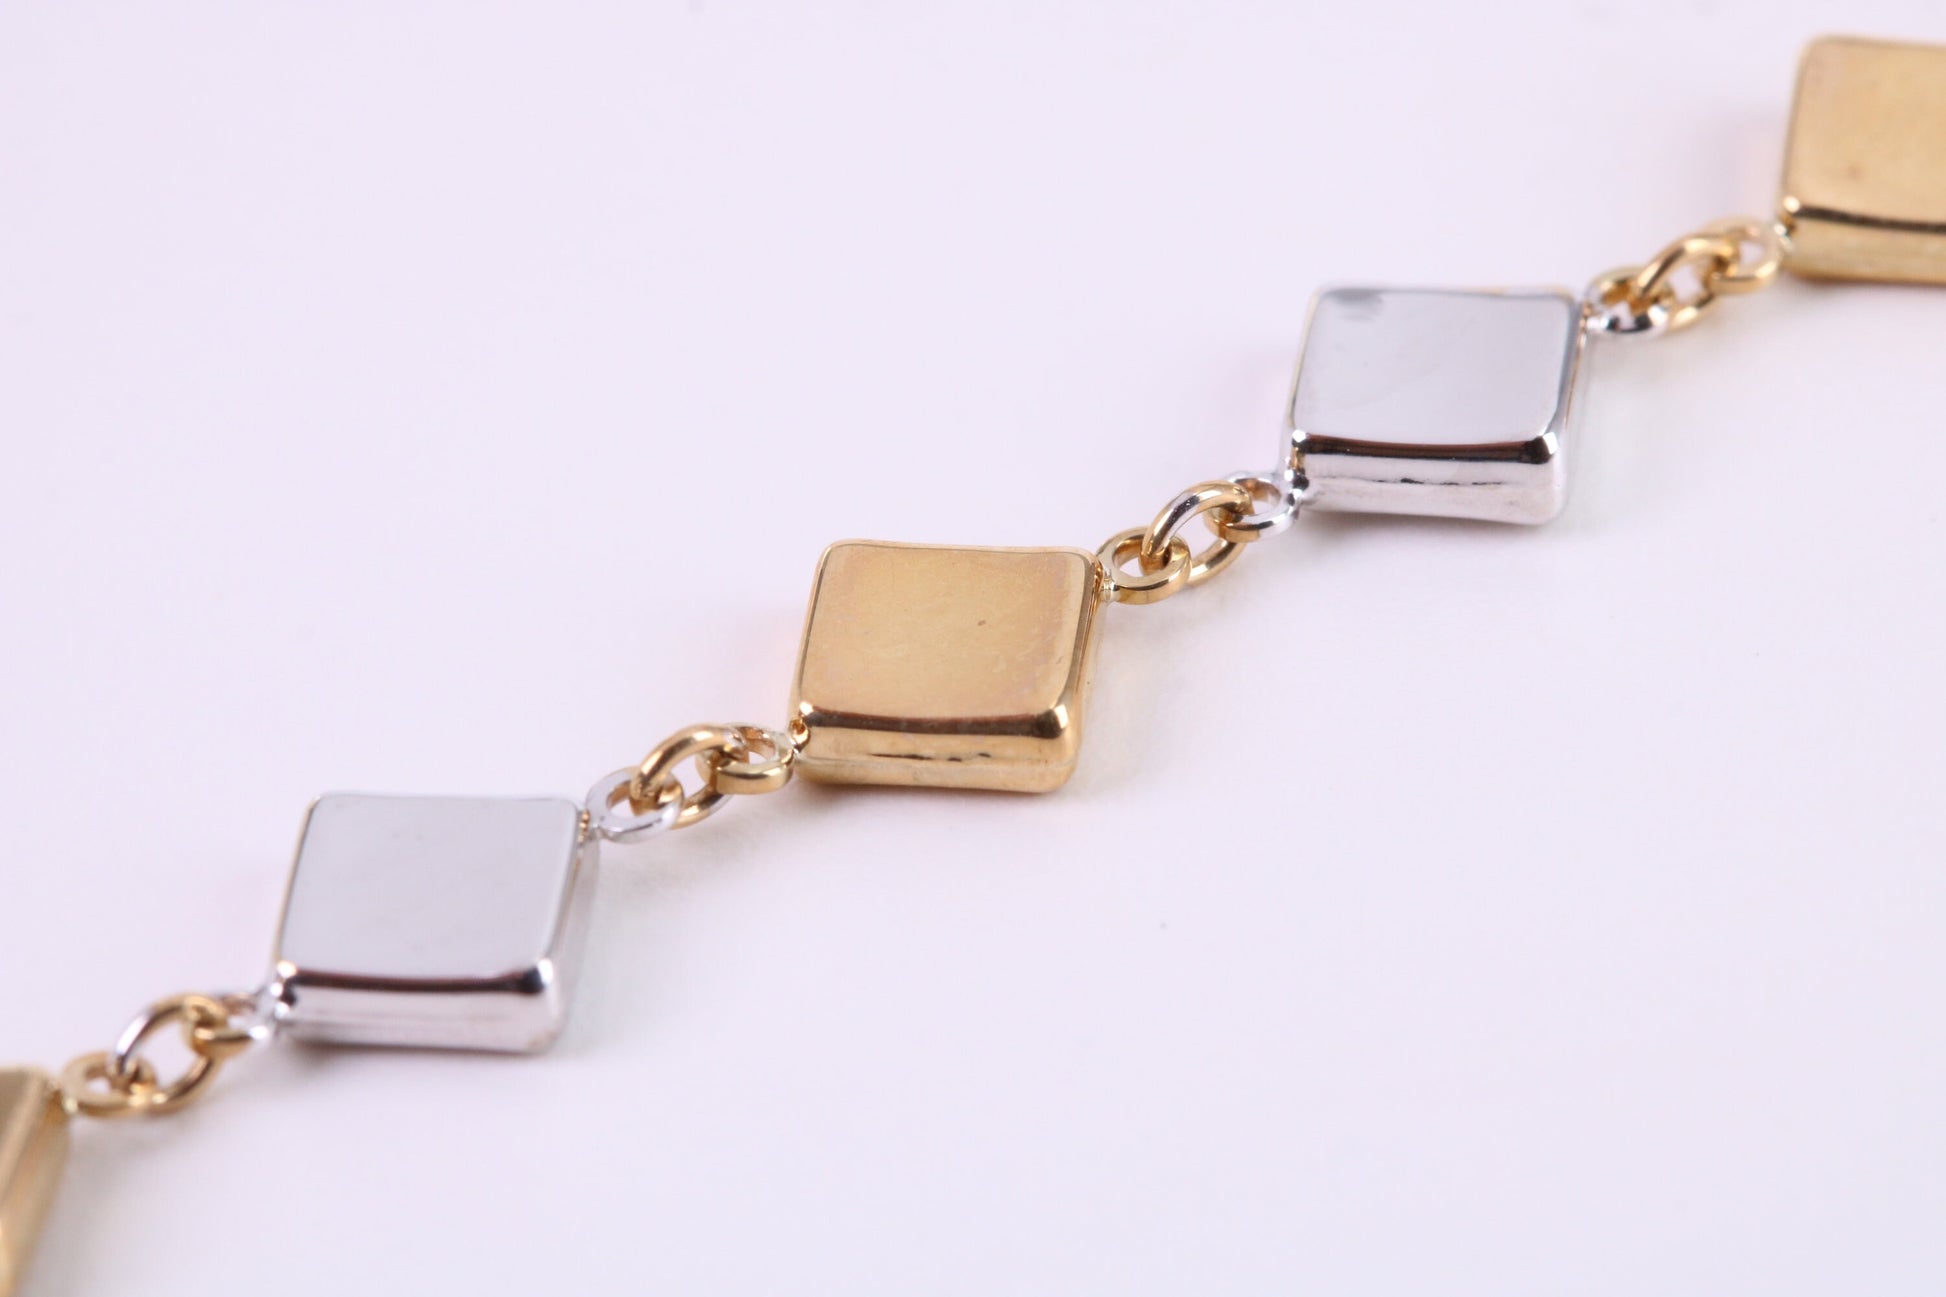 Square Link Bracelet, Made From Solid Yellow and White Gold, British Hallmarked, Luxury Gift Boxed